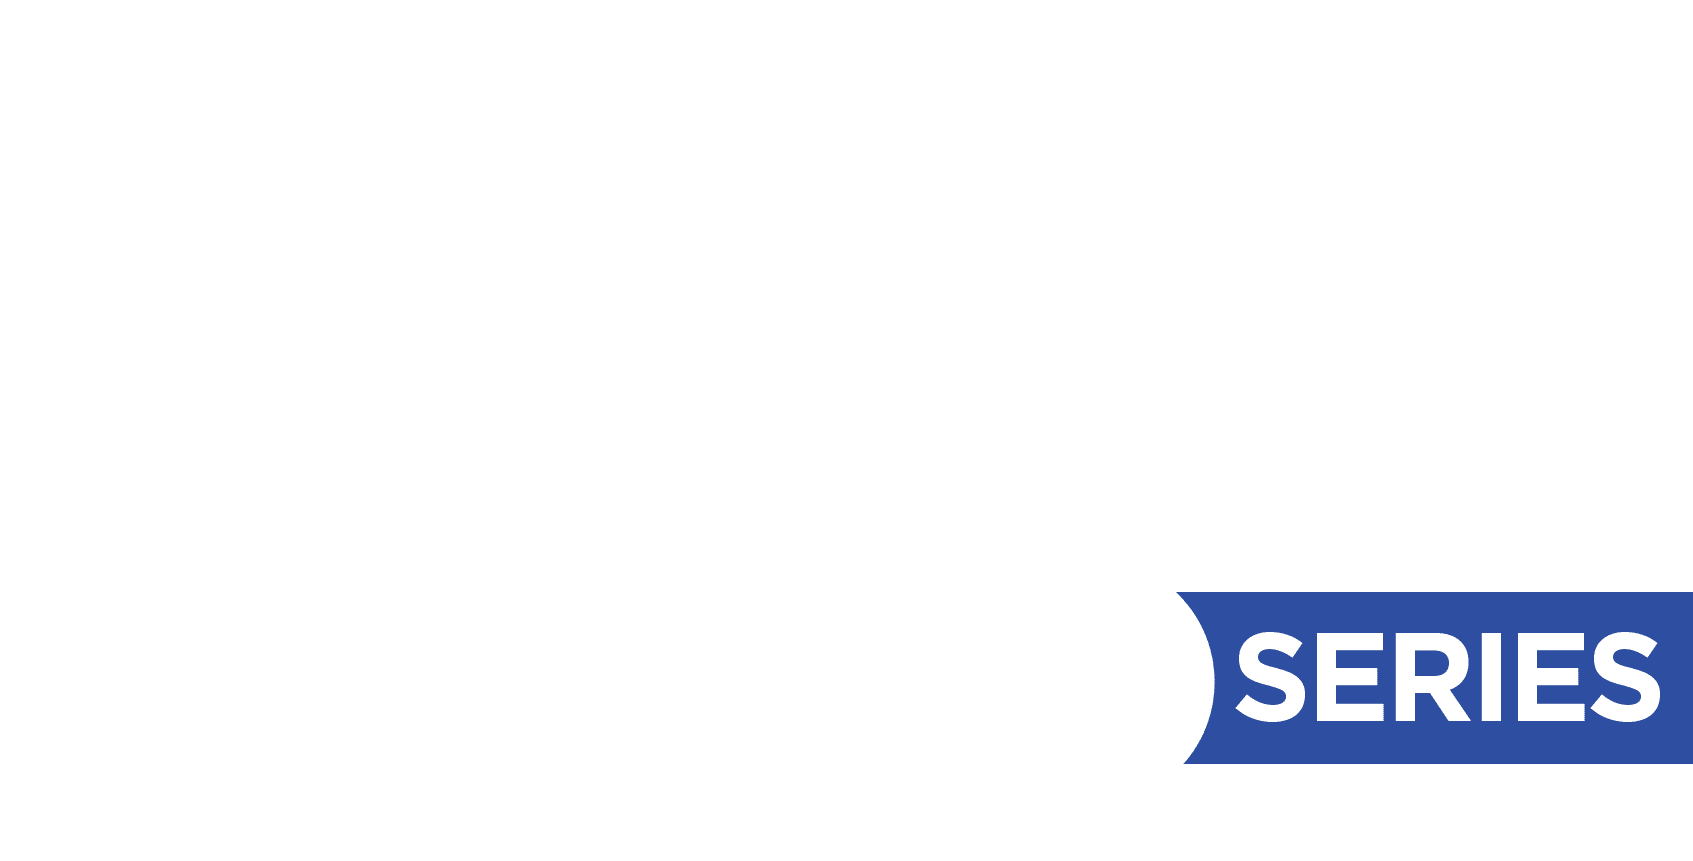 Called-for-Mission-Series